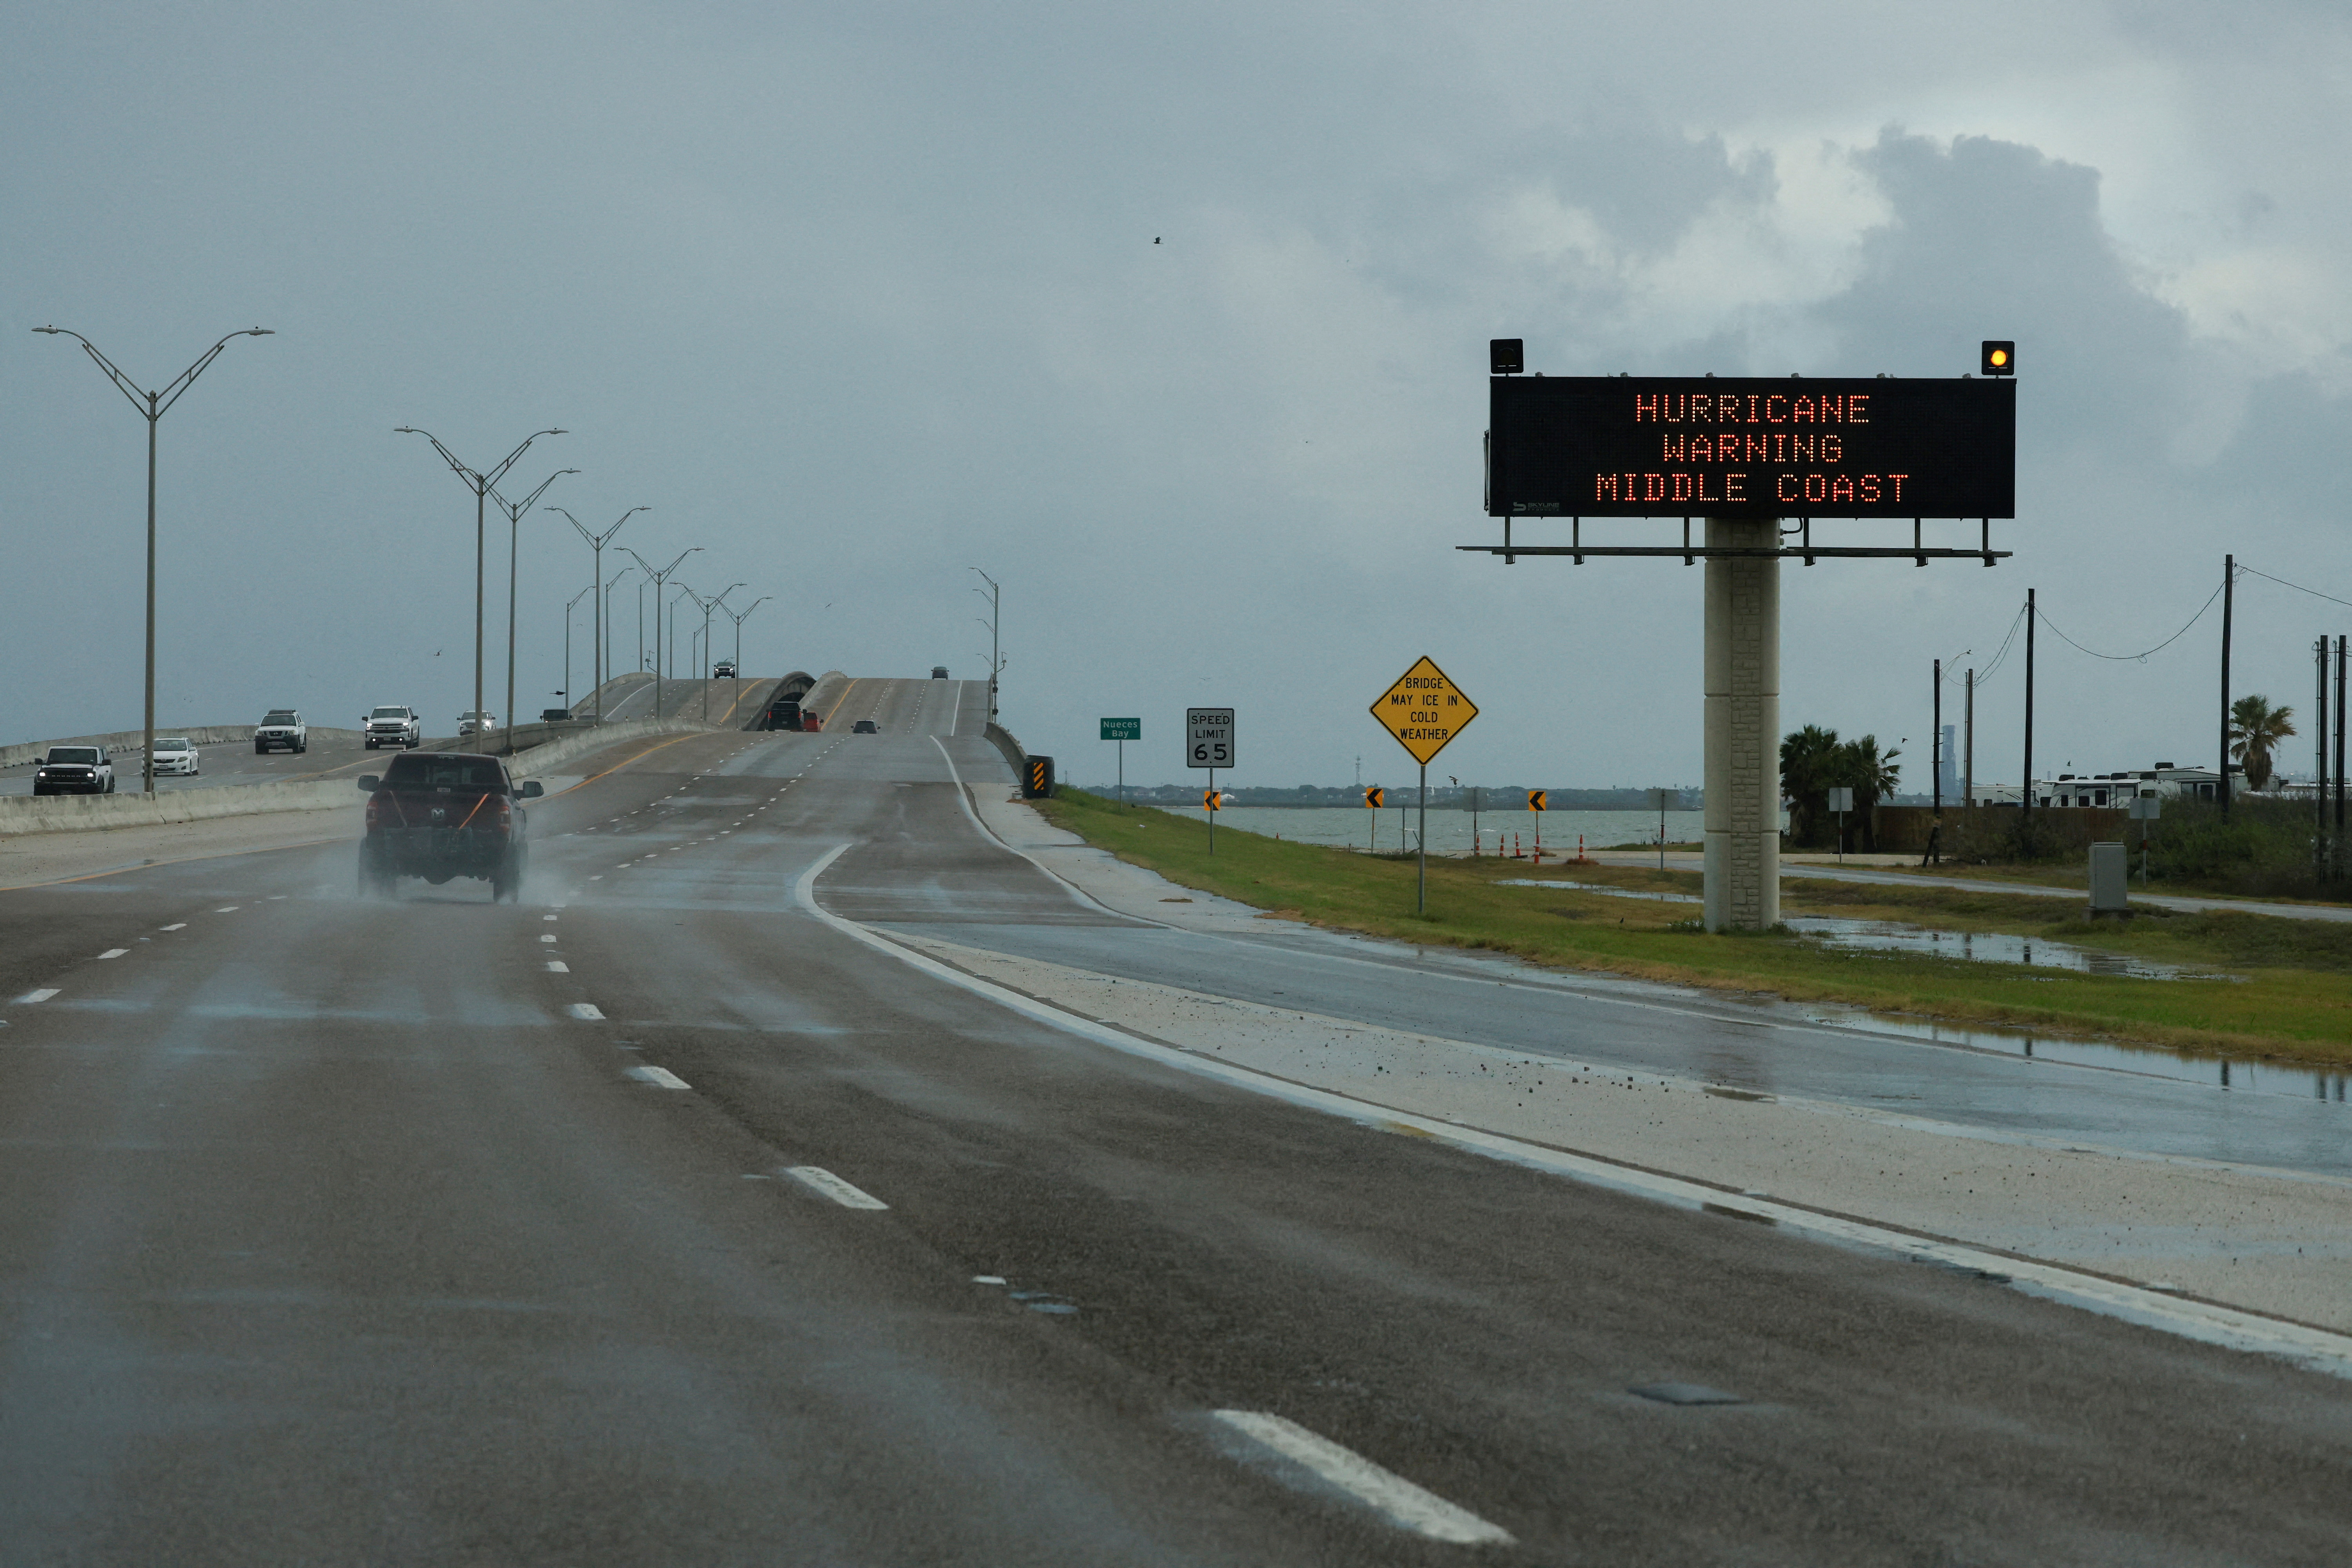 A Hurricane warning sign is pictured in Corpus Christi, Texas